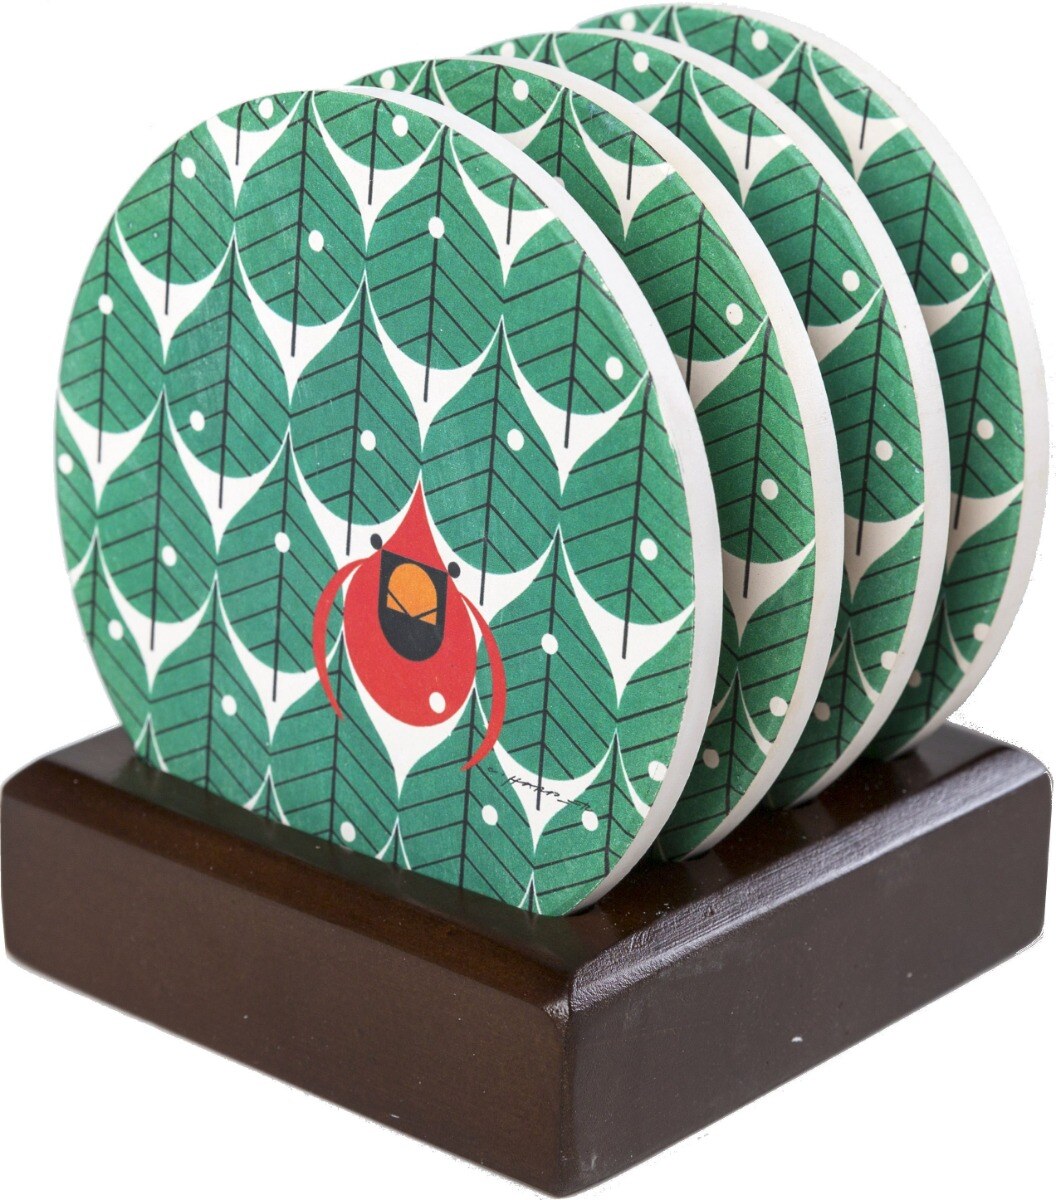 Coniferous Cardinals Stone Coaster Set with Wooden Stand